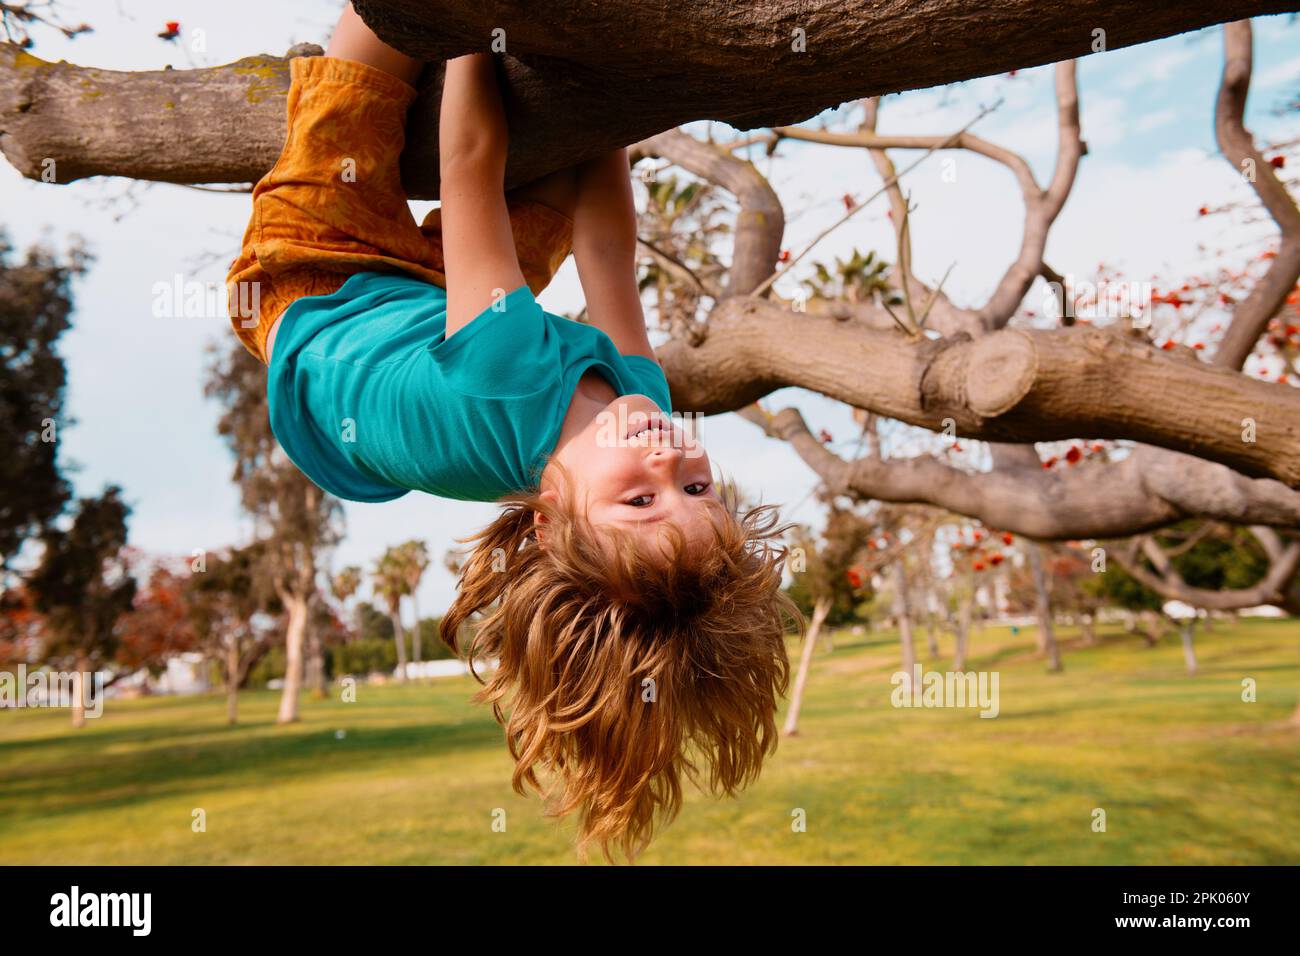 Kids climbing trees, hanging upside down on a tree in a park. Stock Photo